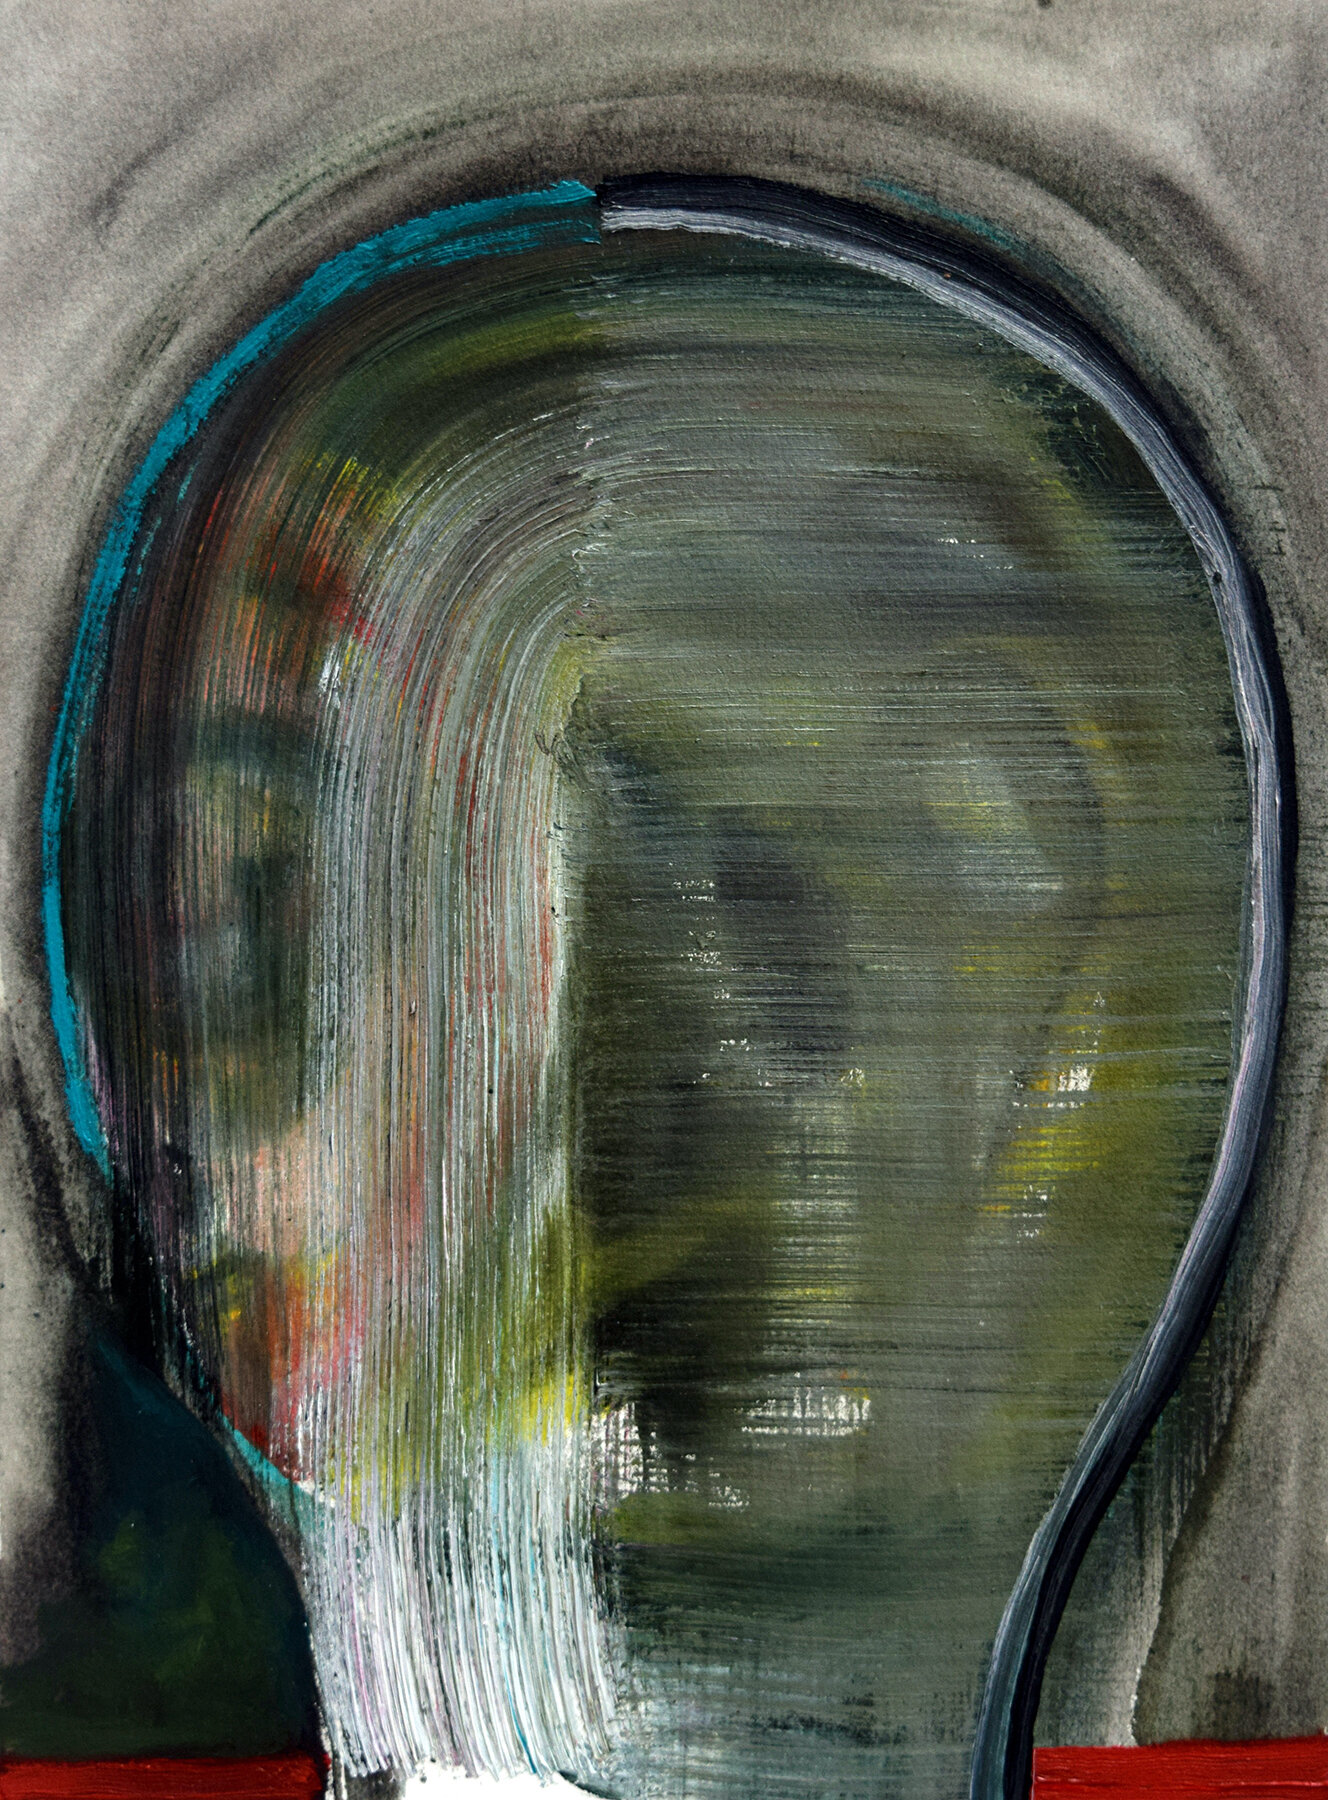 CLINT JUKKALA | Memory Erase, 12 x 9 inches / 30.5 x 22.9 cm, oil on paper, 2019